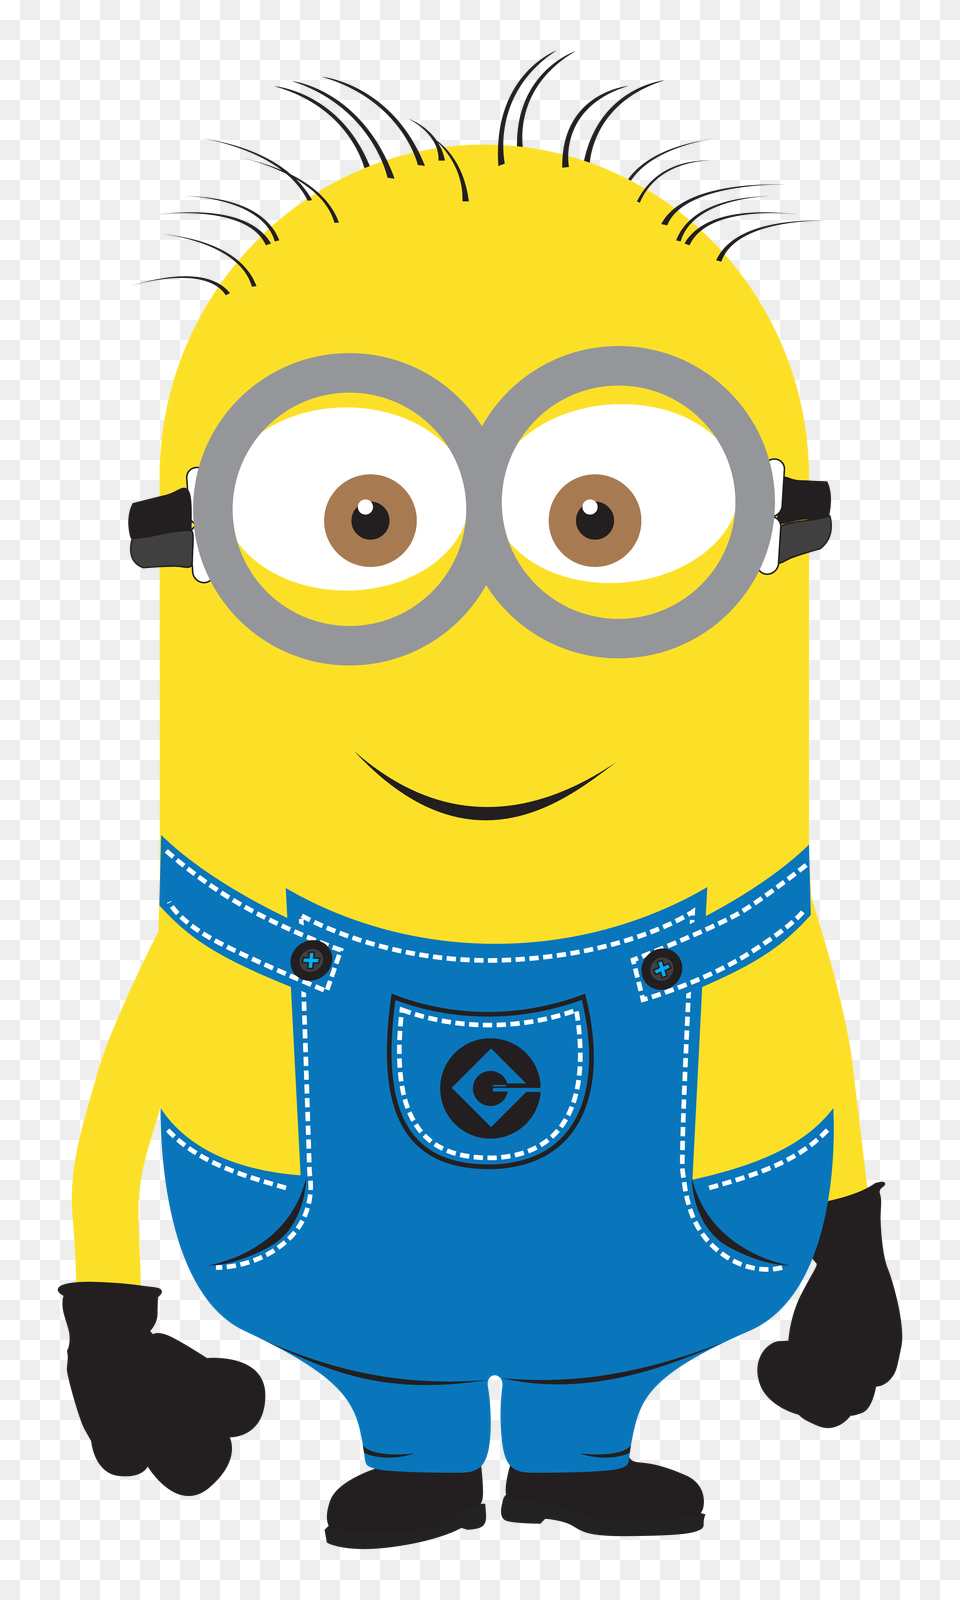 Minion Vector Hd Minions Cartoon, Plush, Toy, Nature, Outdoors Png